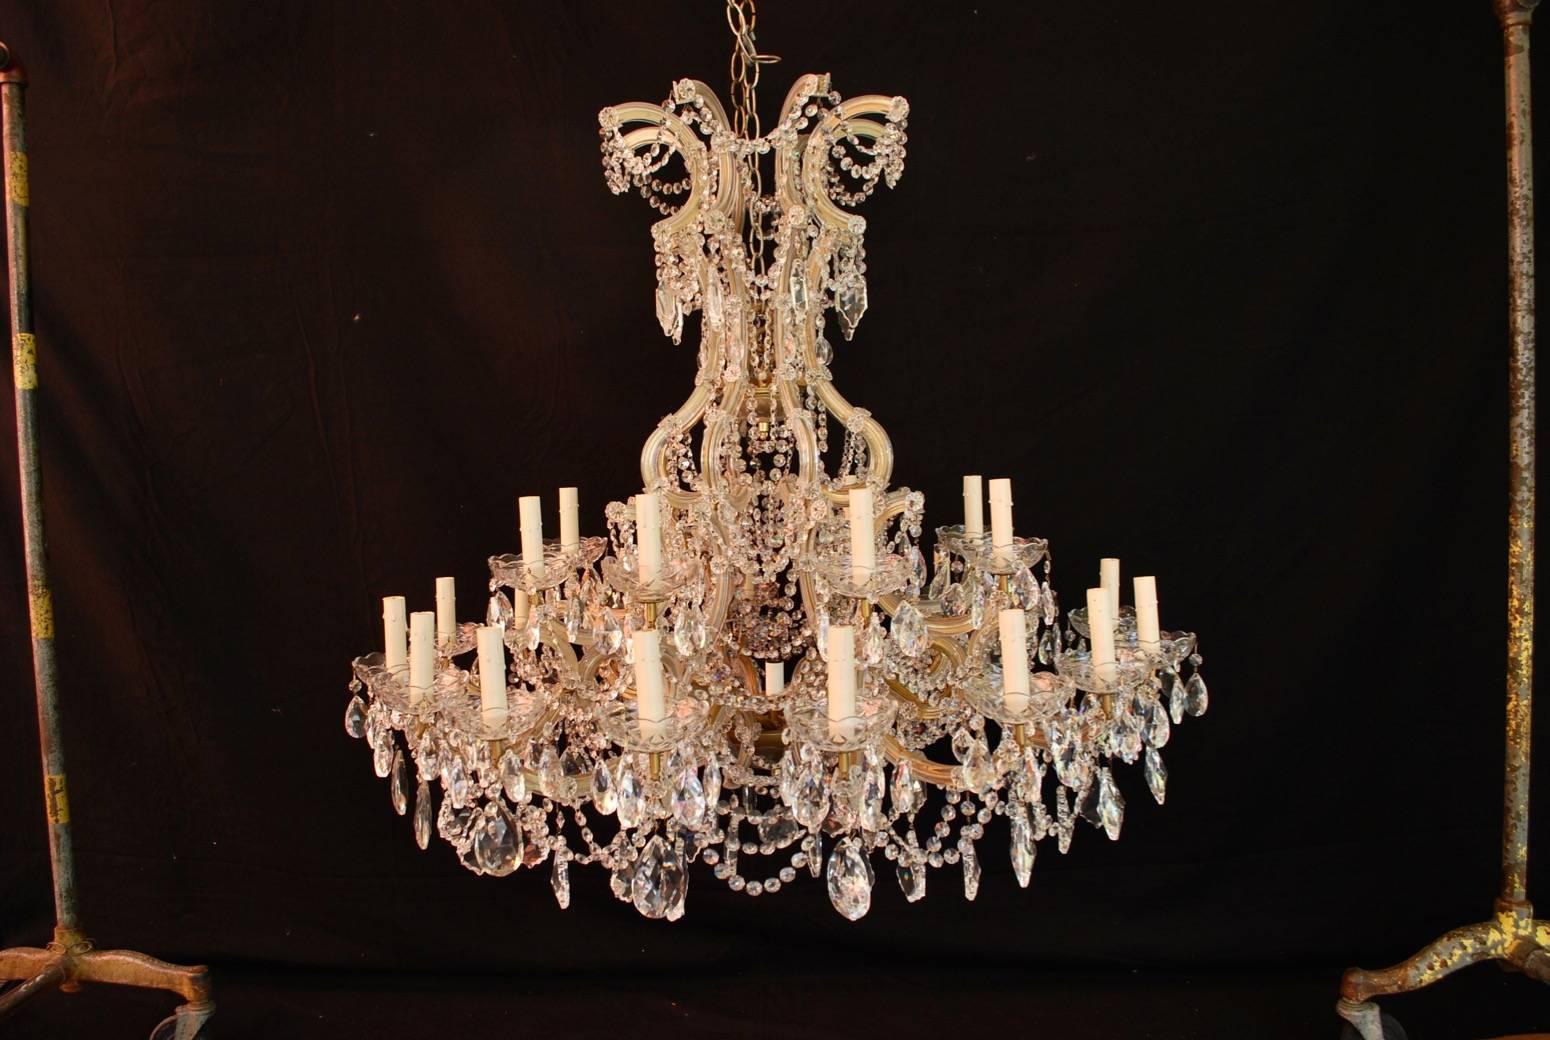 We have over 3000 antique sconces and over 100 antique lights, if you need a specific pair of sconces or lights use the contact dealer button to ask us; we might have it in our store.
We also have our own line of wrought iron reproduction sconces